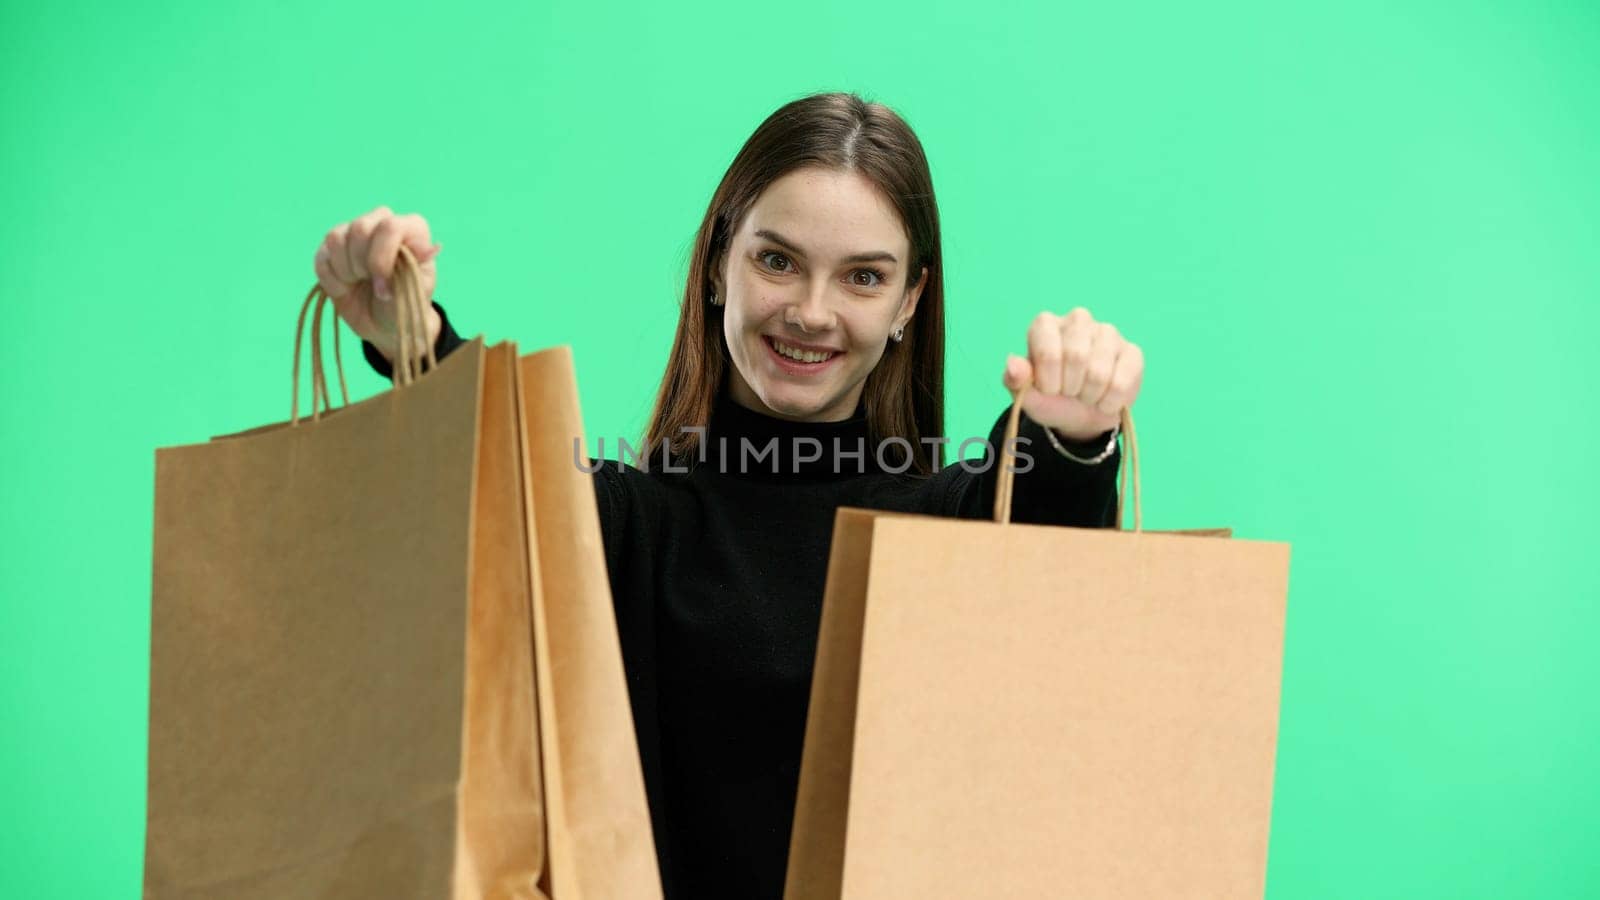 Woman, close-up, on a green background, with bags.